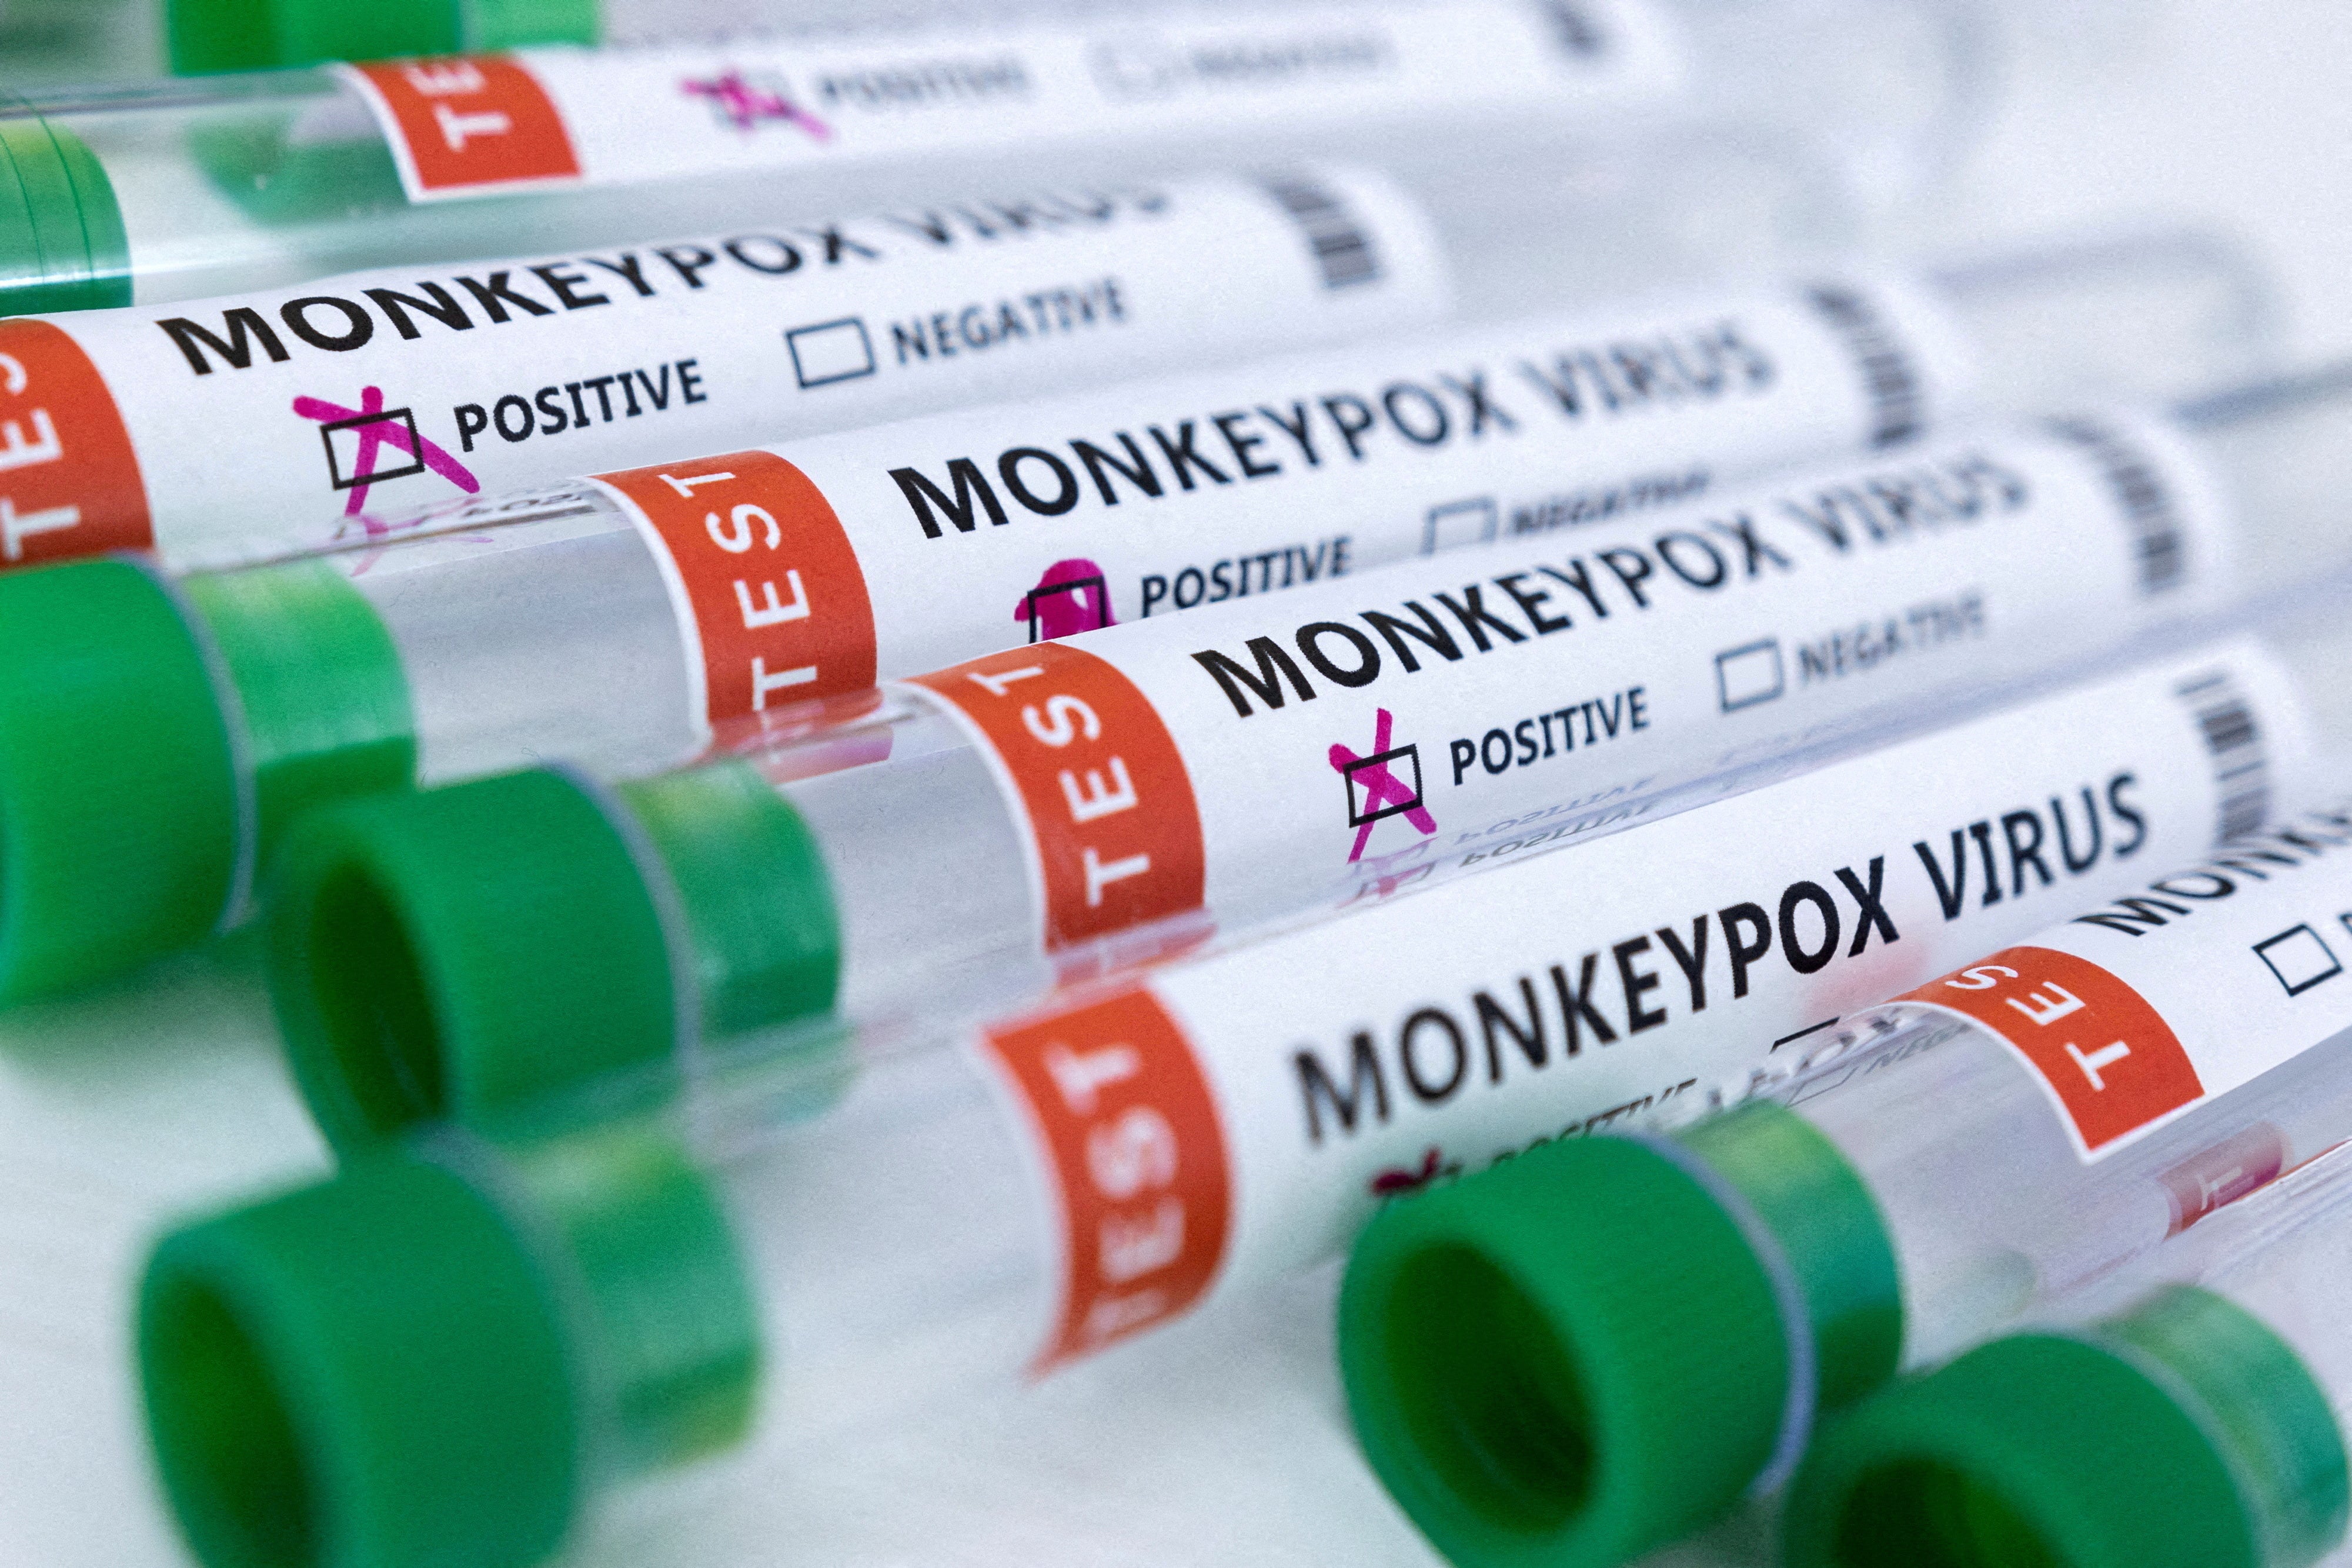 As of Monday, there were 793 confirmed cases of monkeypox in the UK